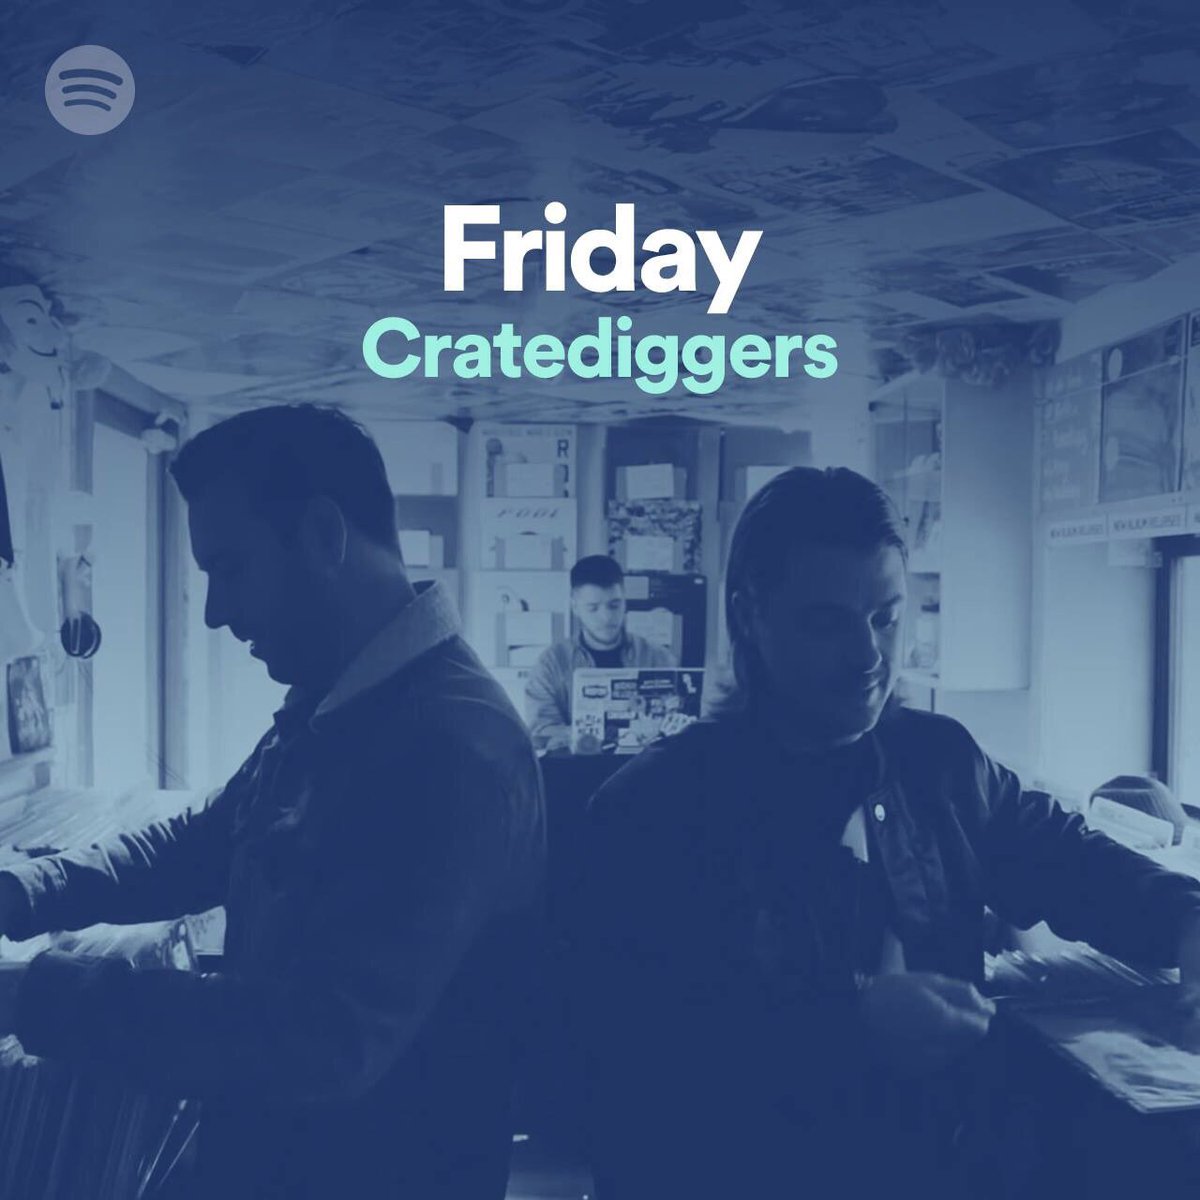 Dreamer is out everywhere and we’re on the cover of @Spotify cratediggers! 🌈 spoti.fi/2oy3b2c https://t.co/O87KGqg6T7